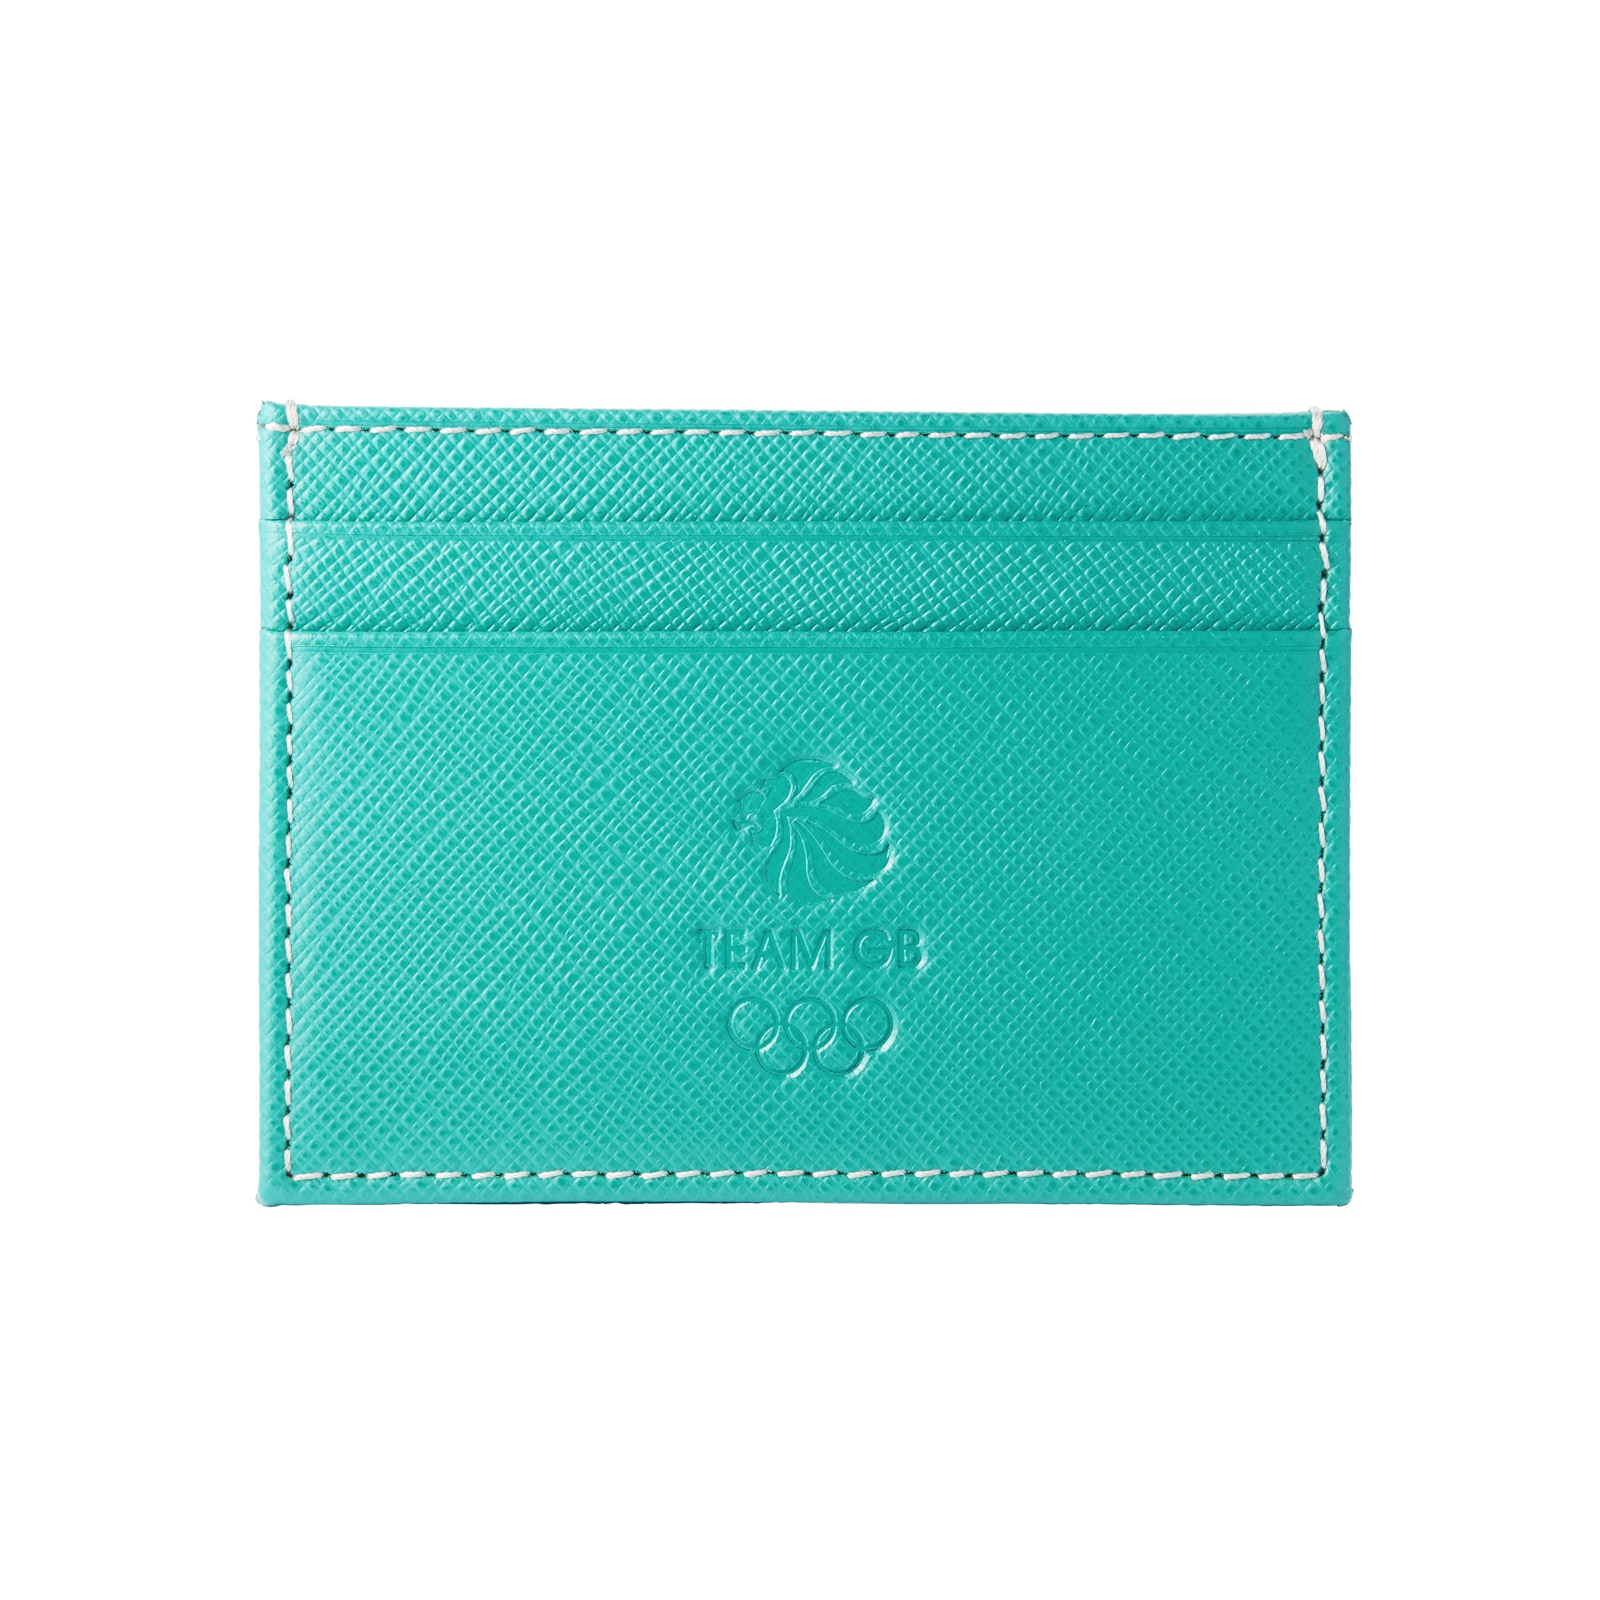 Wallets | Leather Goods | Goldsmiths